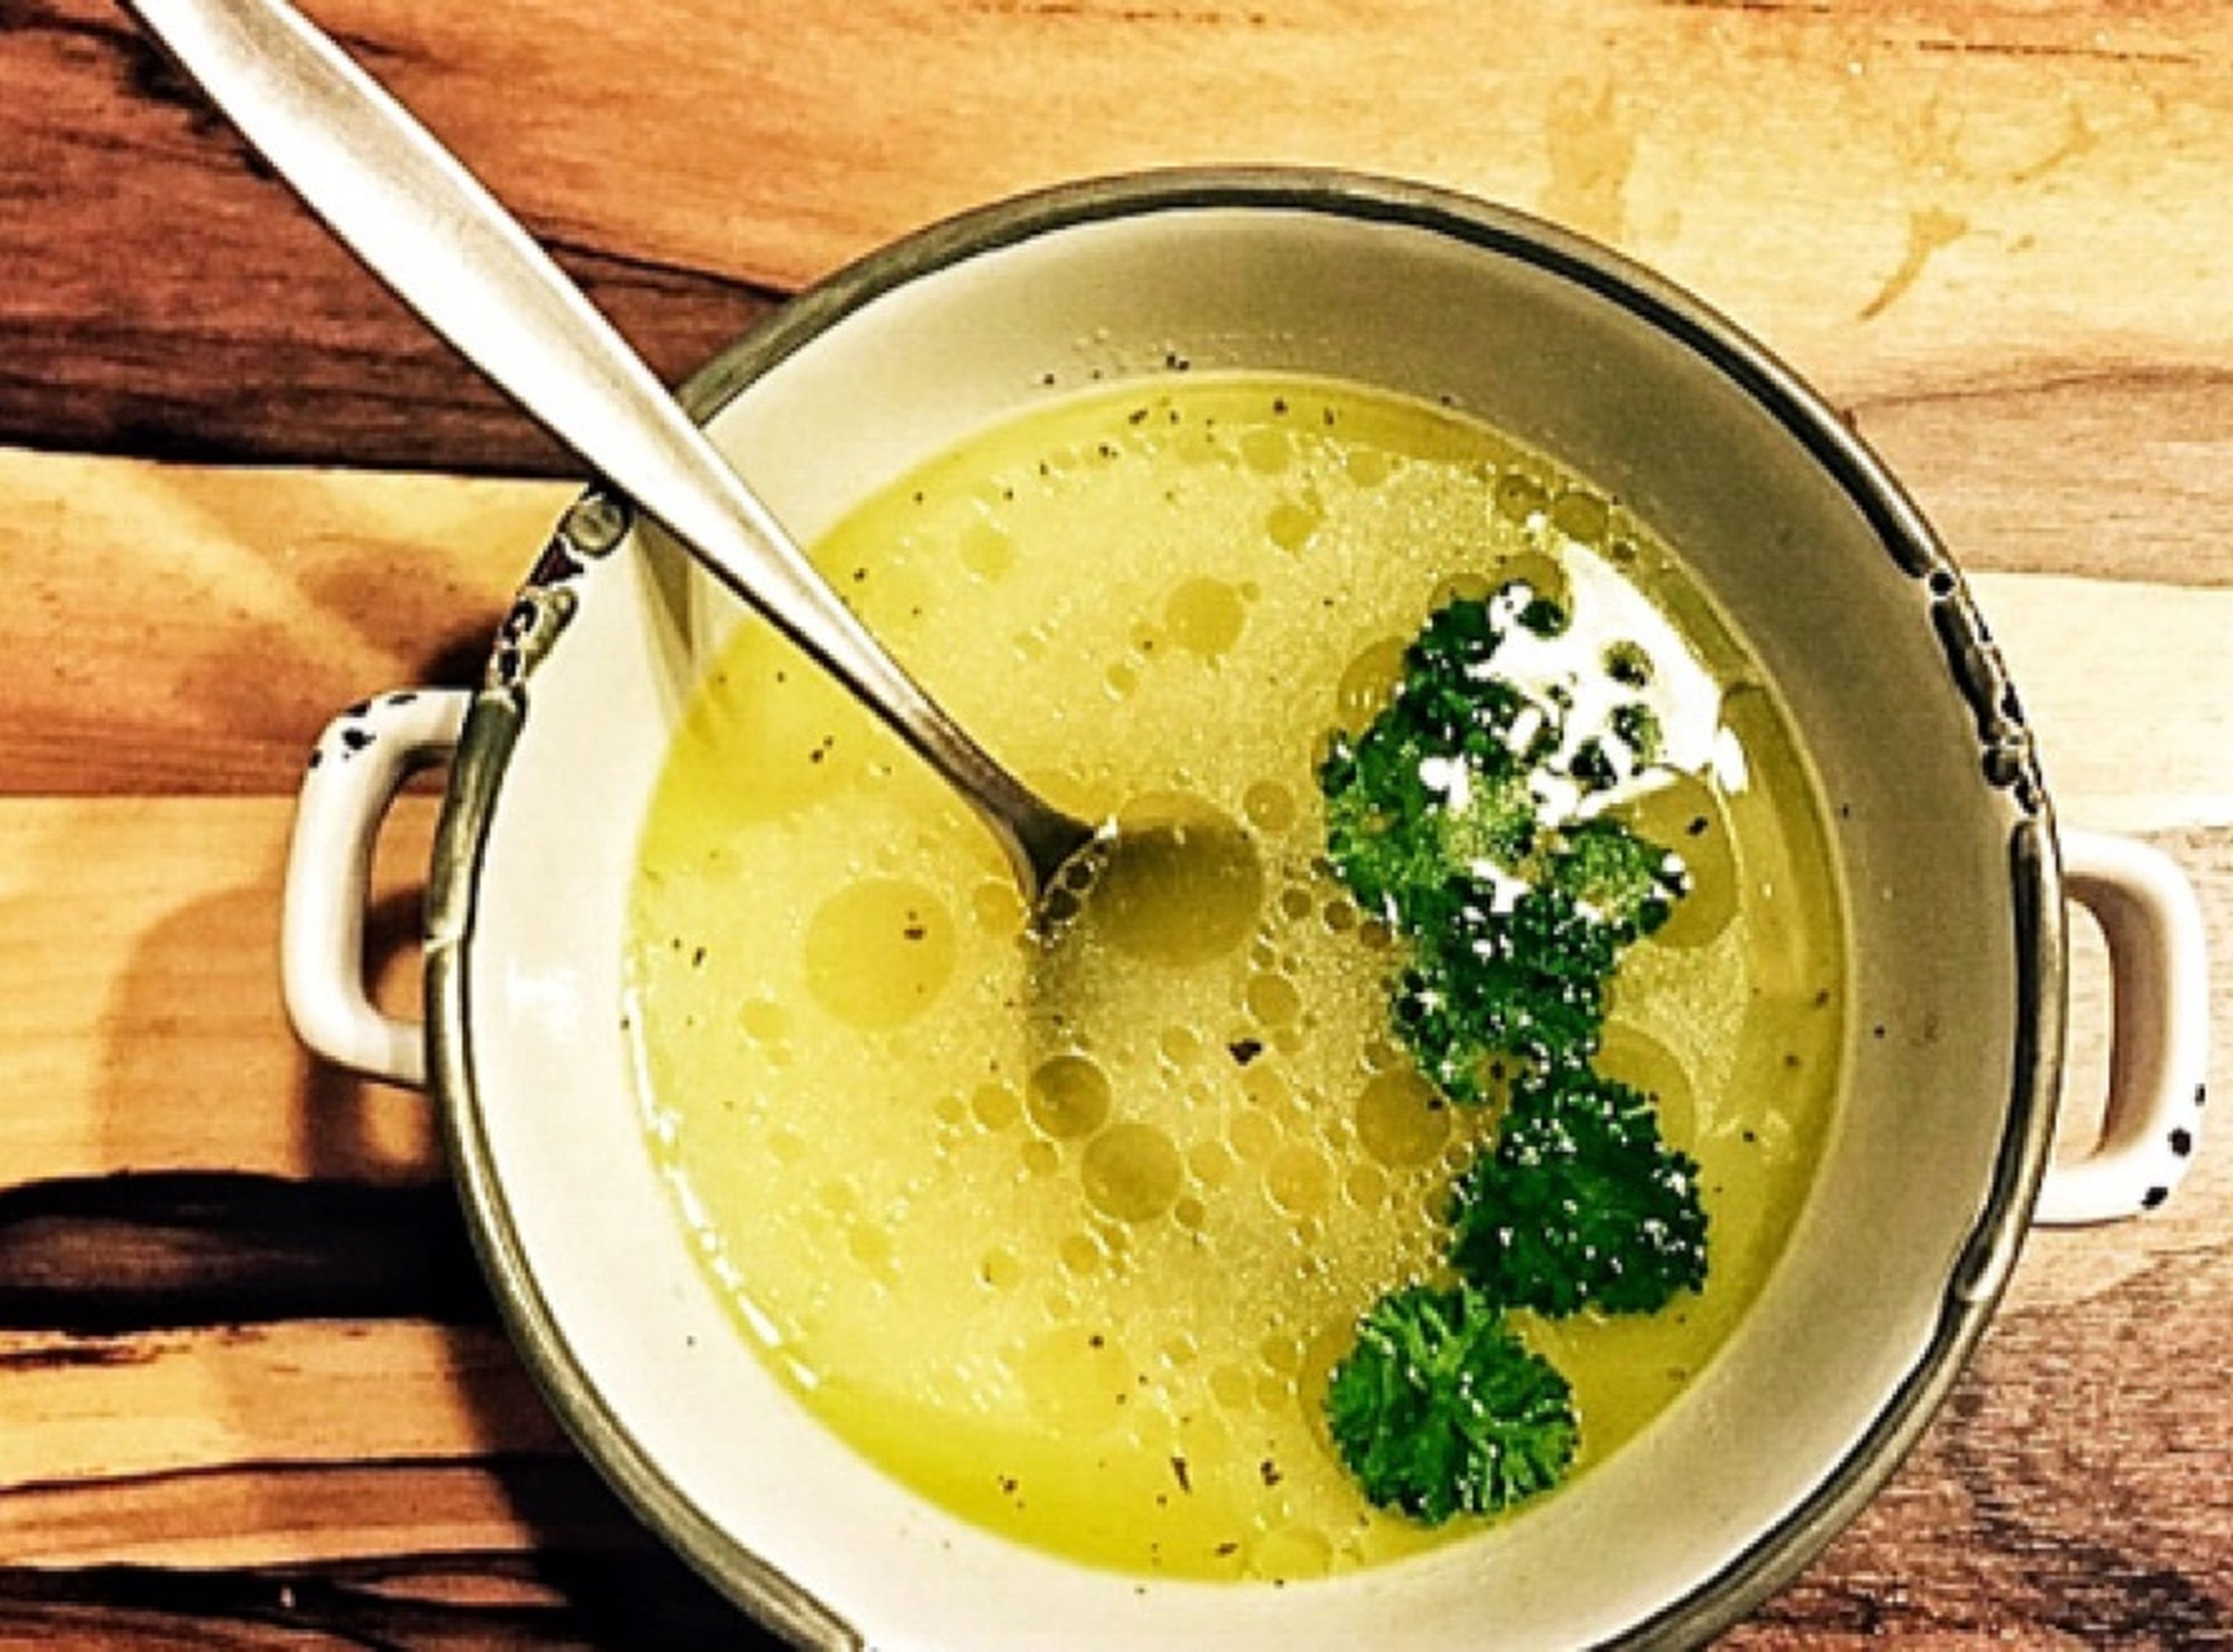 Serve clear broth in a bowl and garnish with parsley.